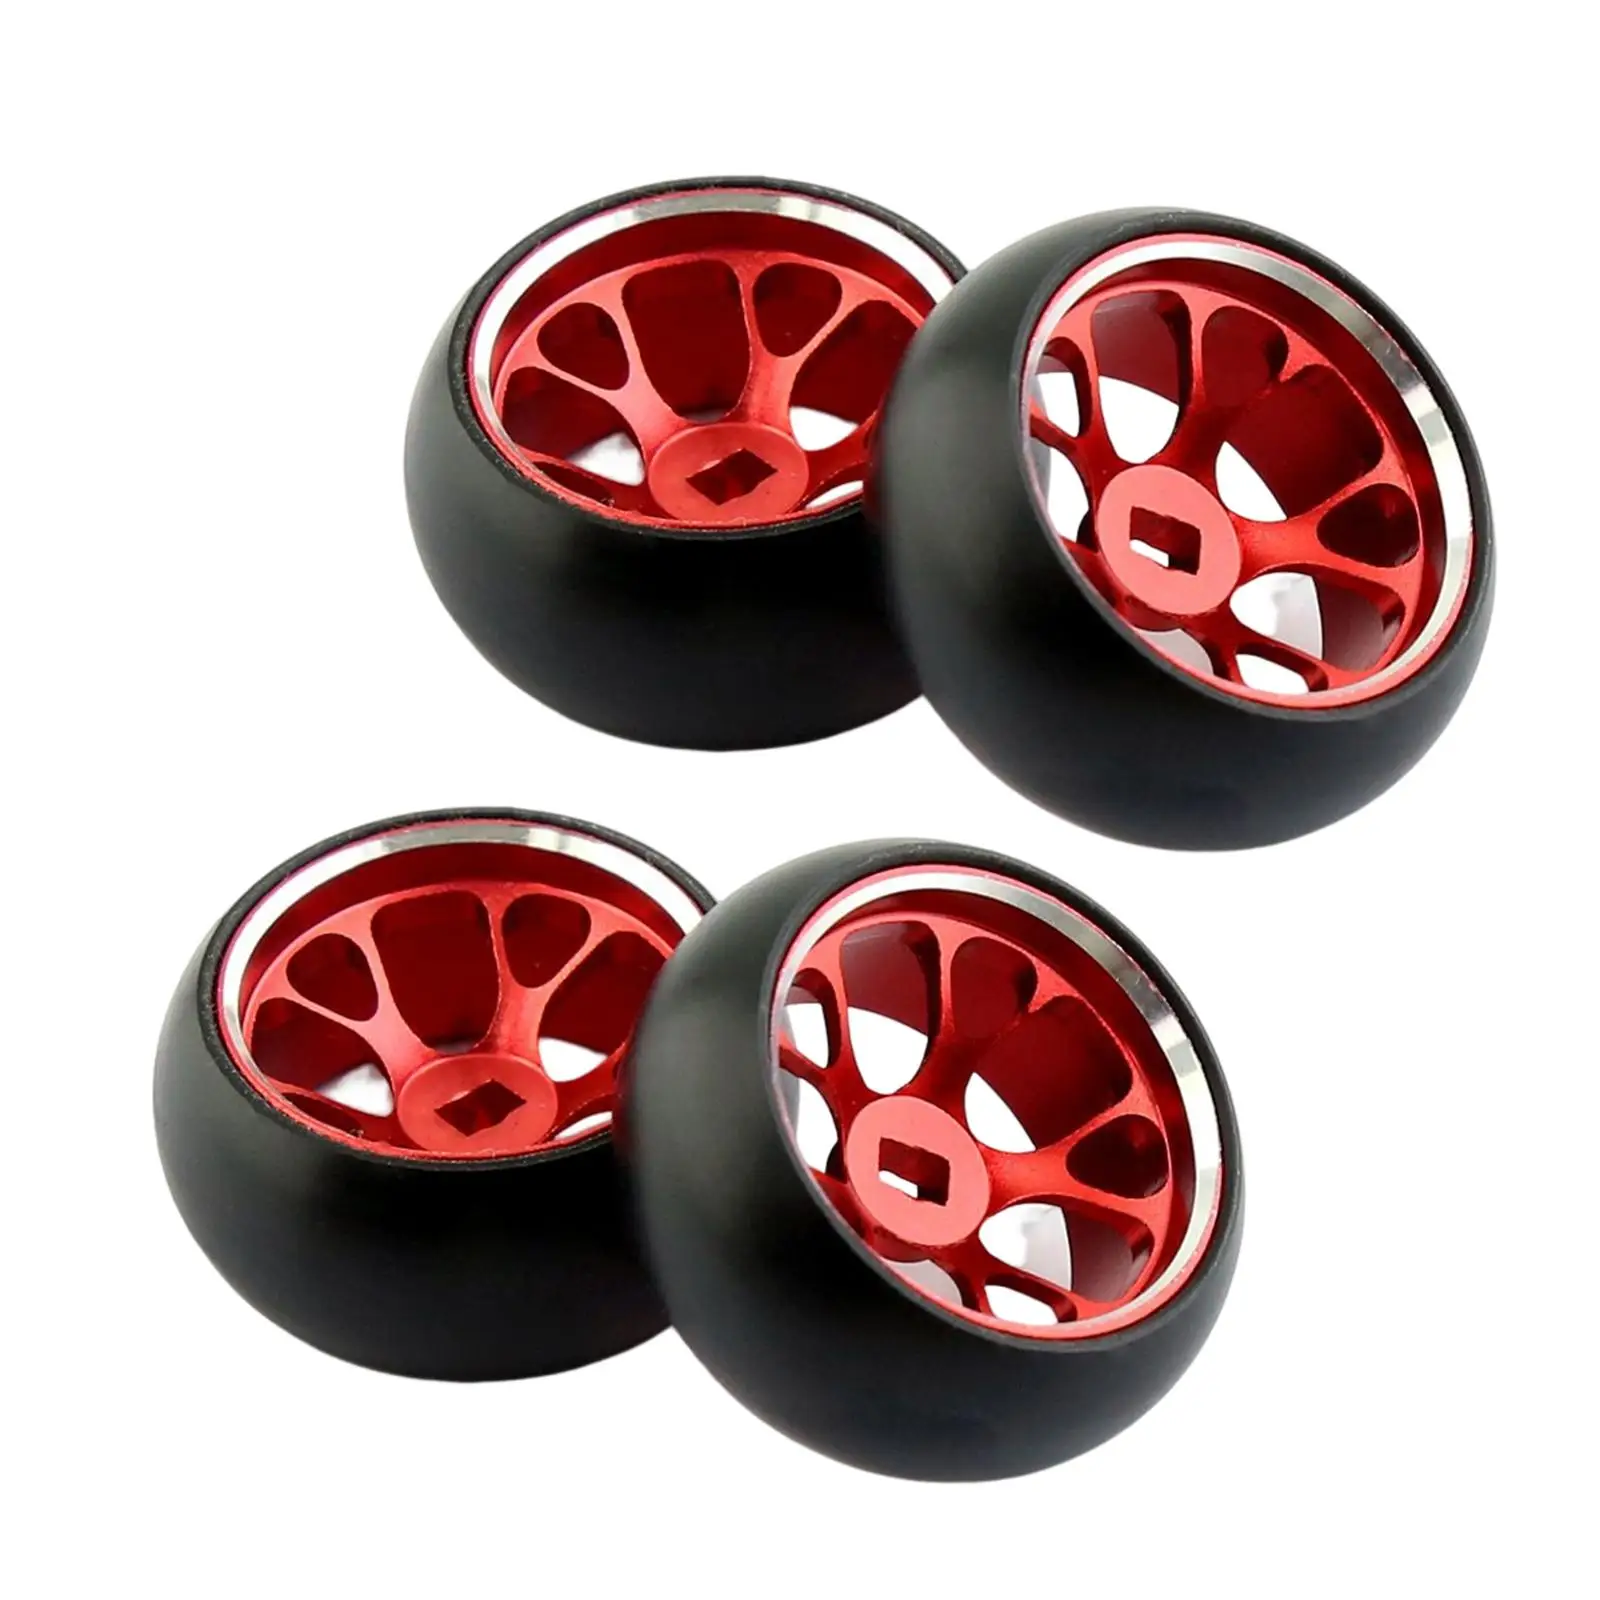 4x 1/28 RC Car Wheel Tires Upgrade Parts Replacement for K989 P939 Parts